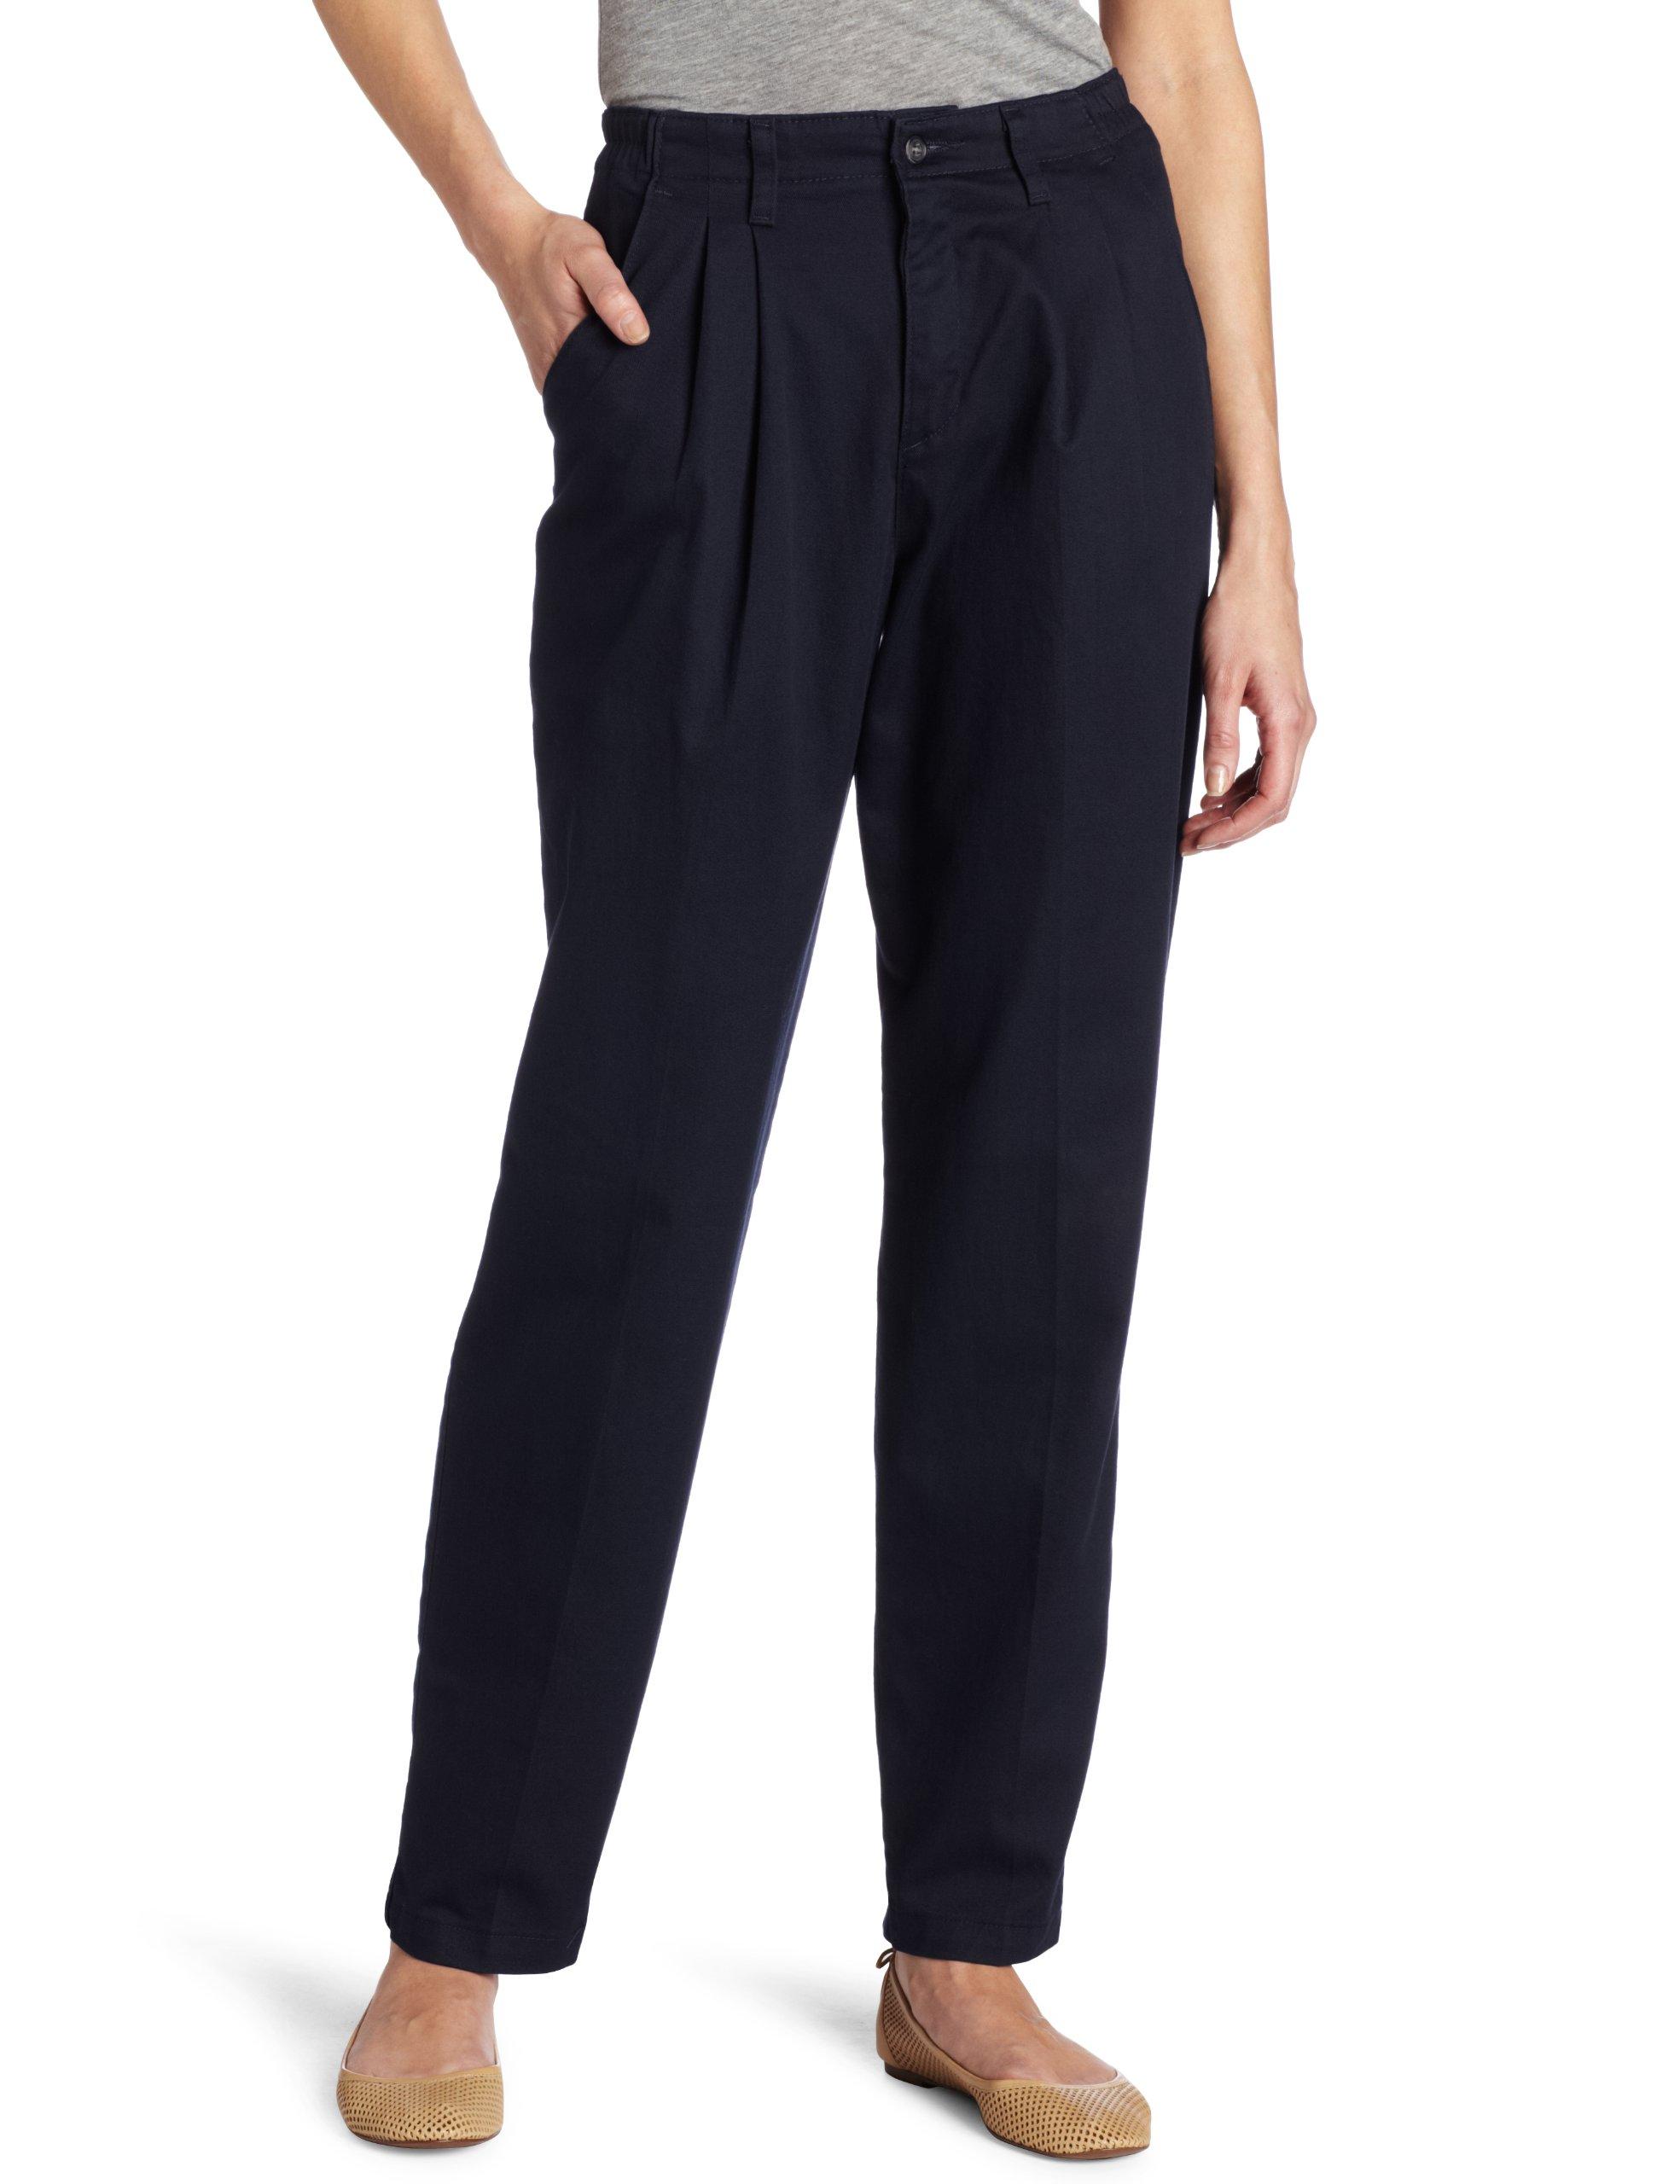 Lee Jeans Relaxed Fit Side Elastic Pleated Pant in Navy (Blue) - Save ...